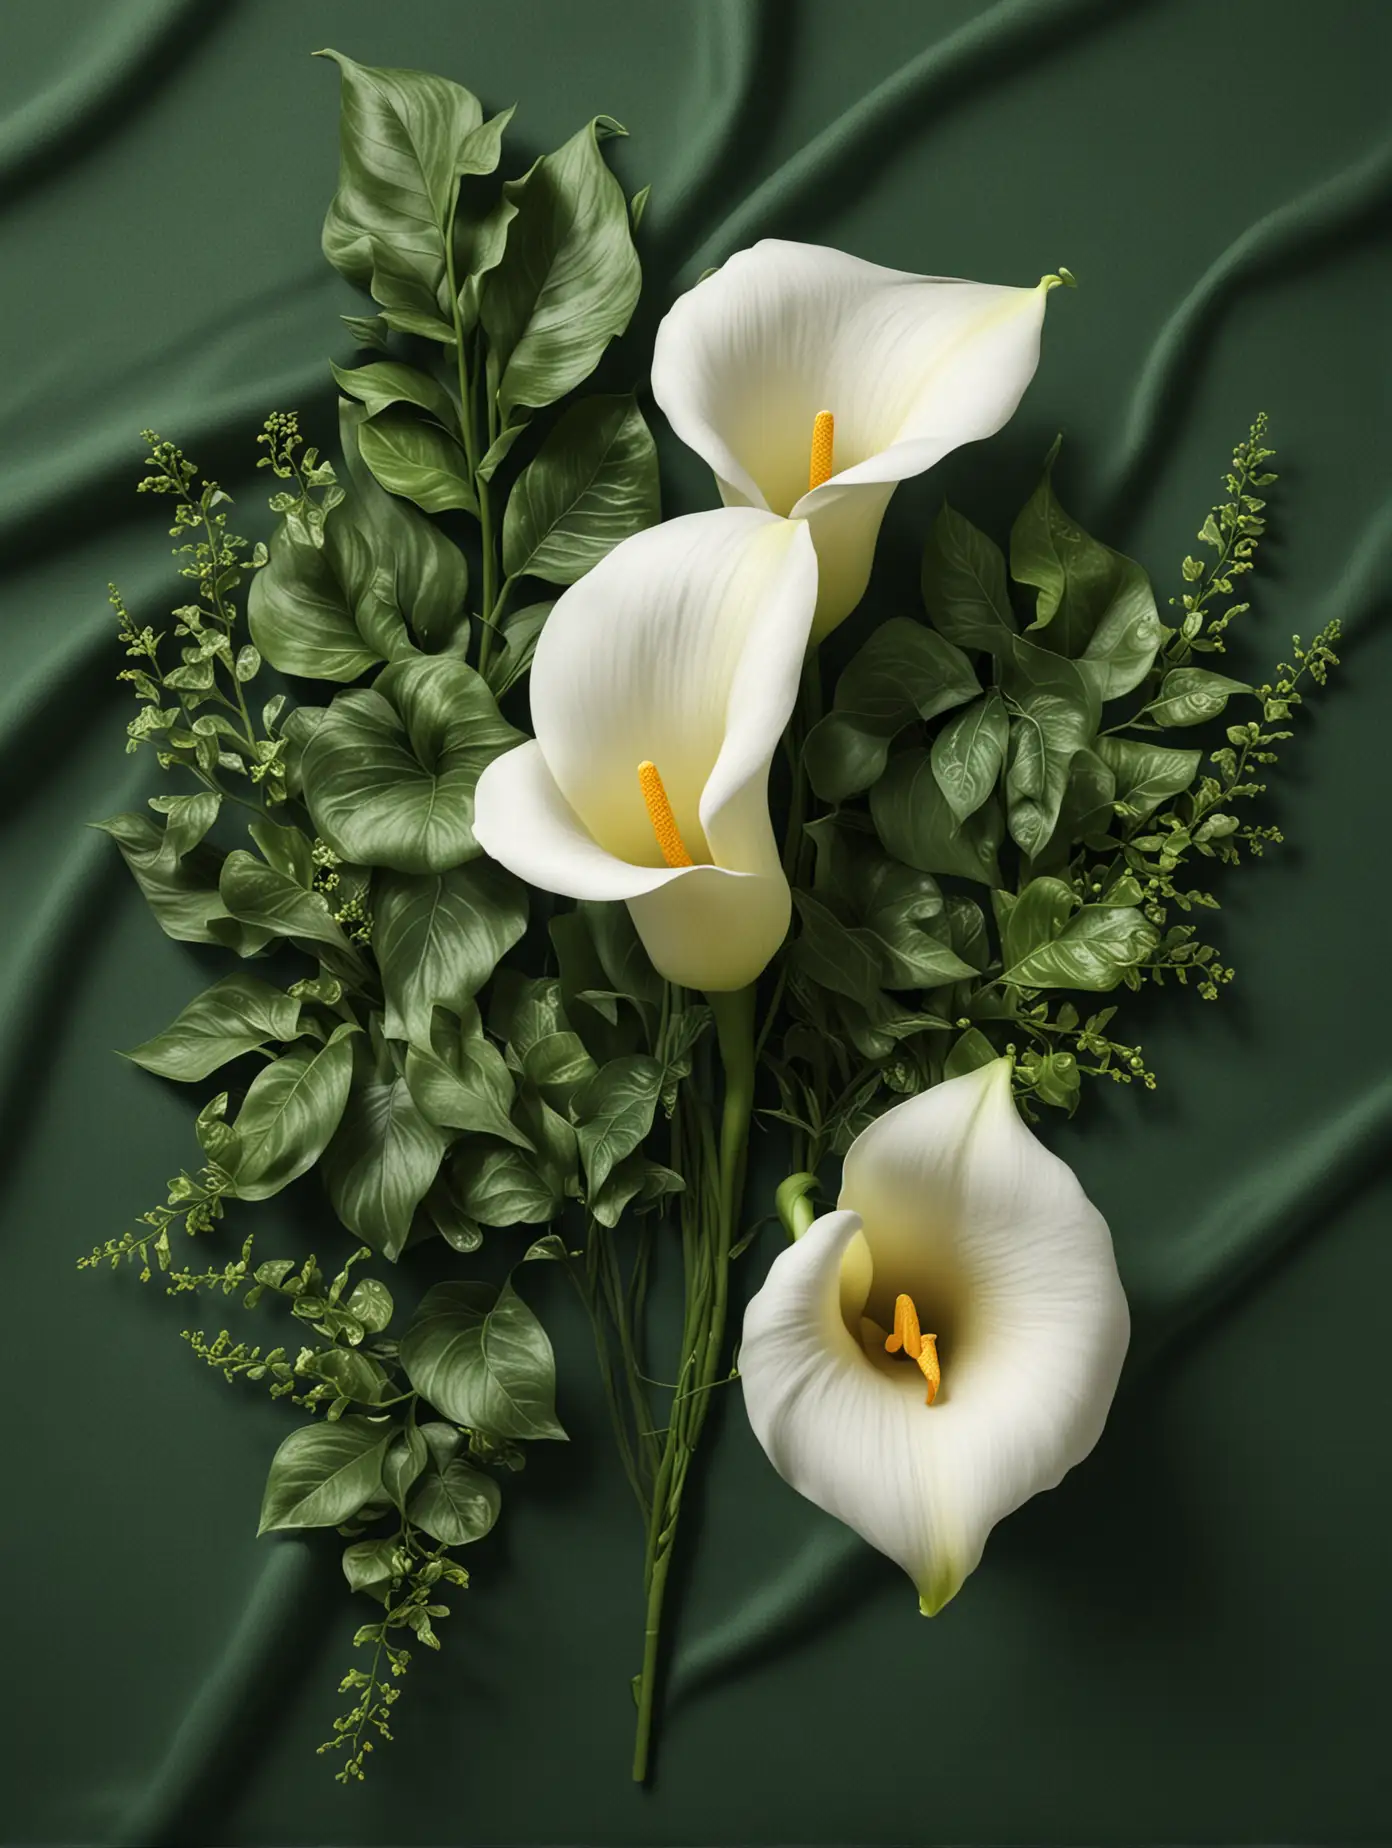 Hyperrealistic Calla Lily and Swirling Ivy on Green Fabric